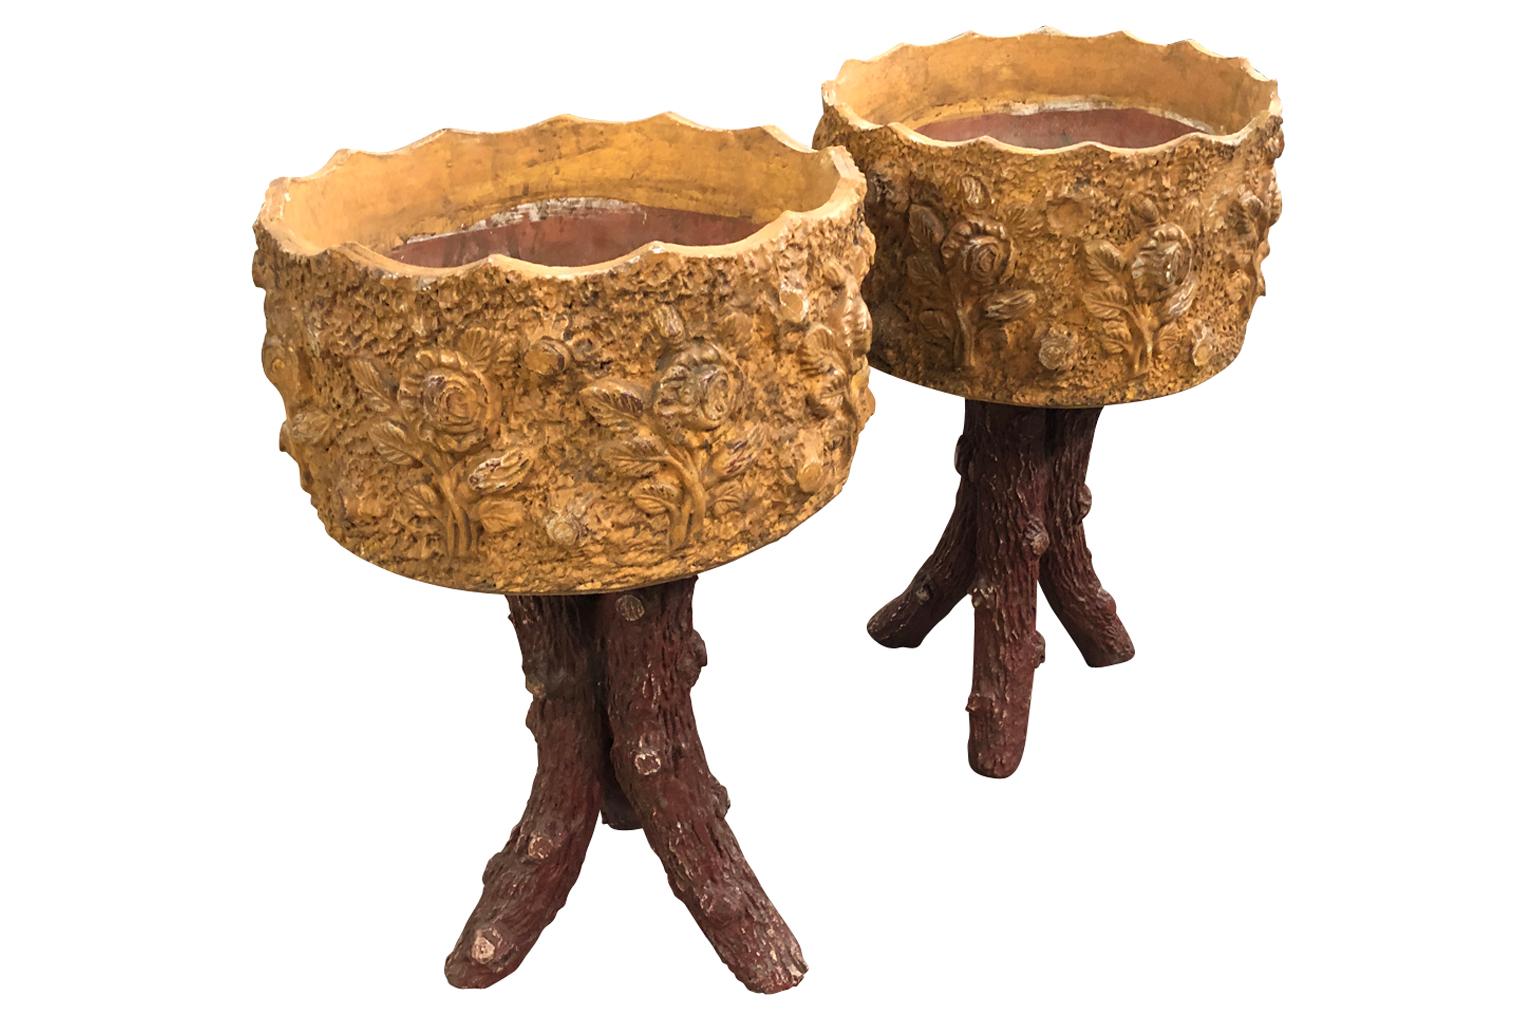 A very charming pair of French glazed terracotta jardinières of Faux Bois styling. Wonderful decorative accent pieces.